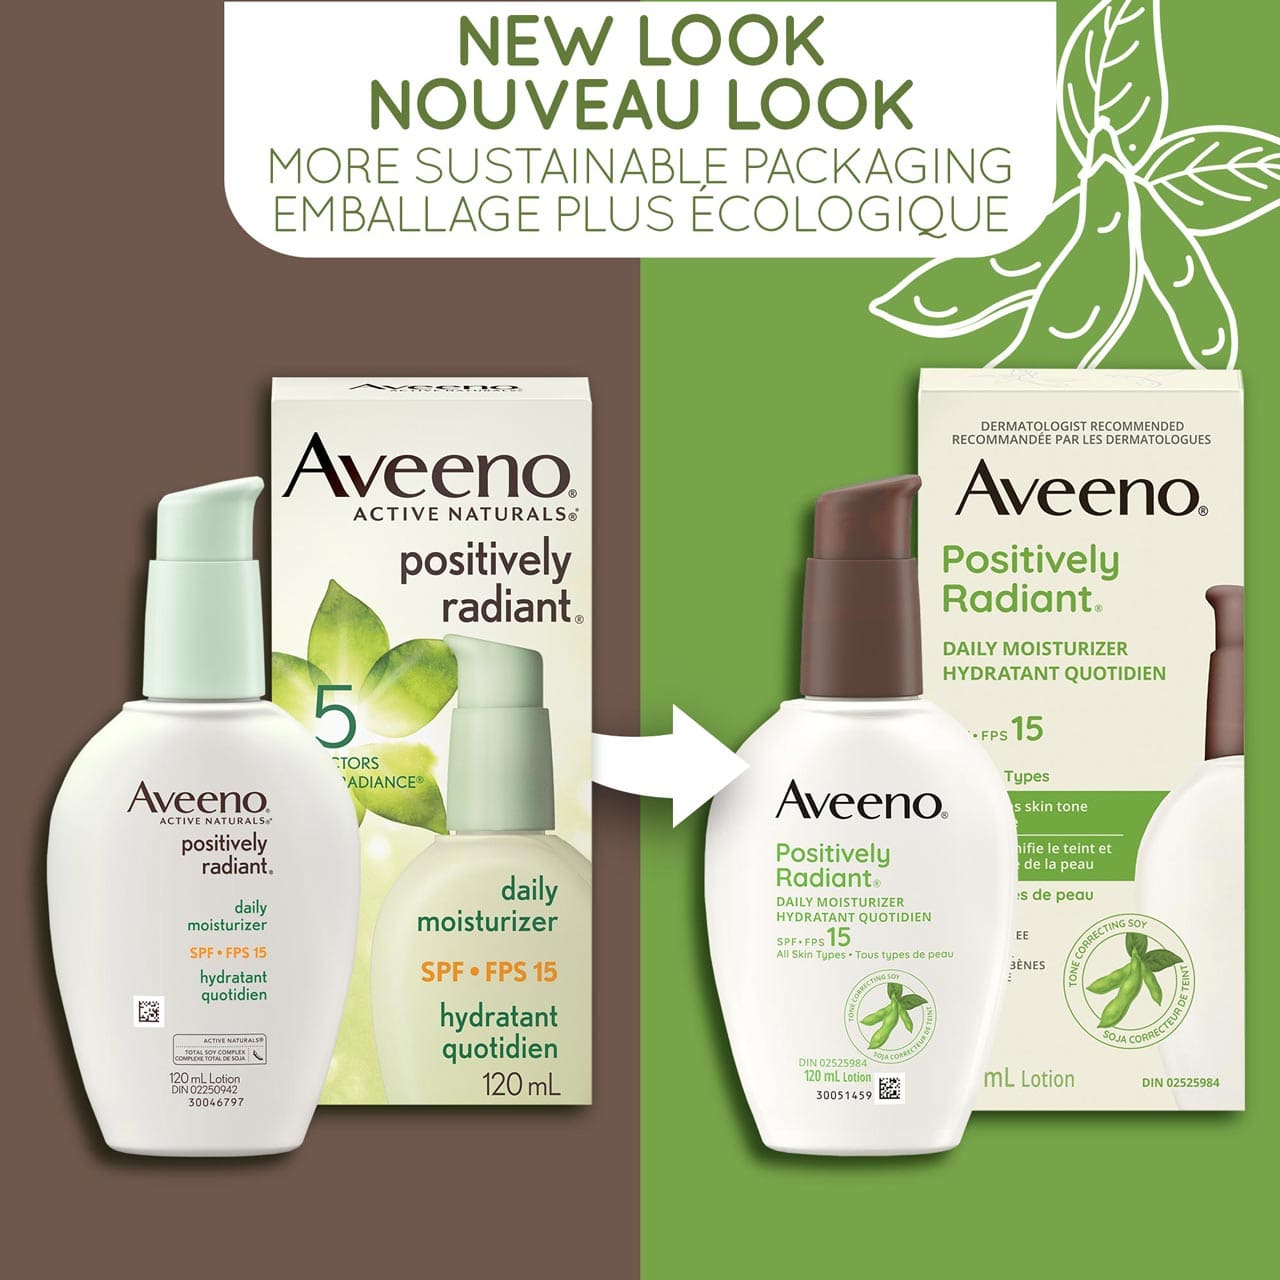 An old and a new packaging of Aveeno Positively Radiant Daily Moisturizer SPF 15 pump bottle, 120mL and a text stating 'New Look, More Sustainable Packaging'